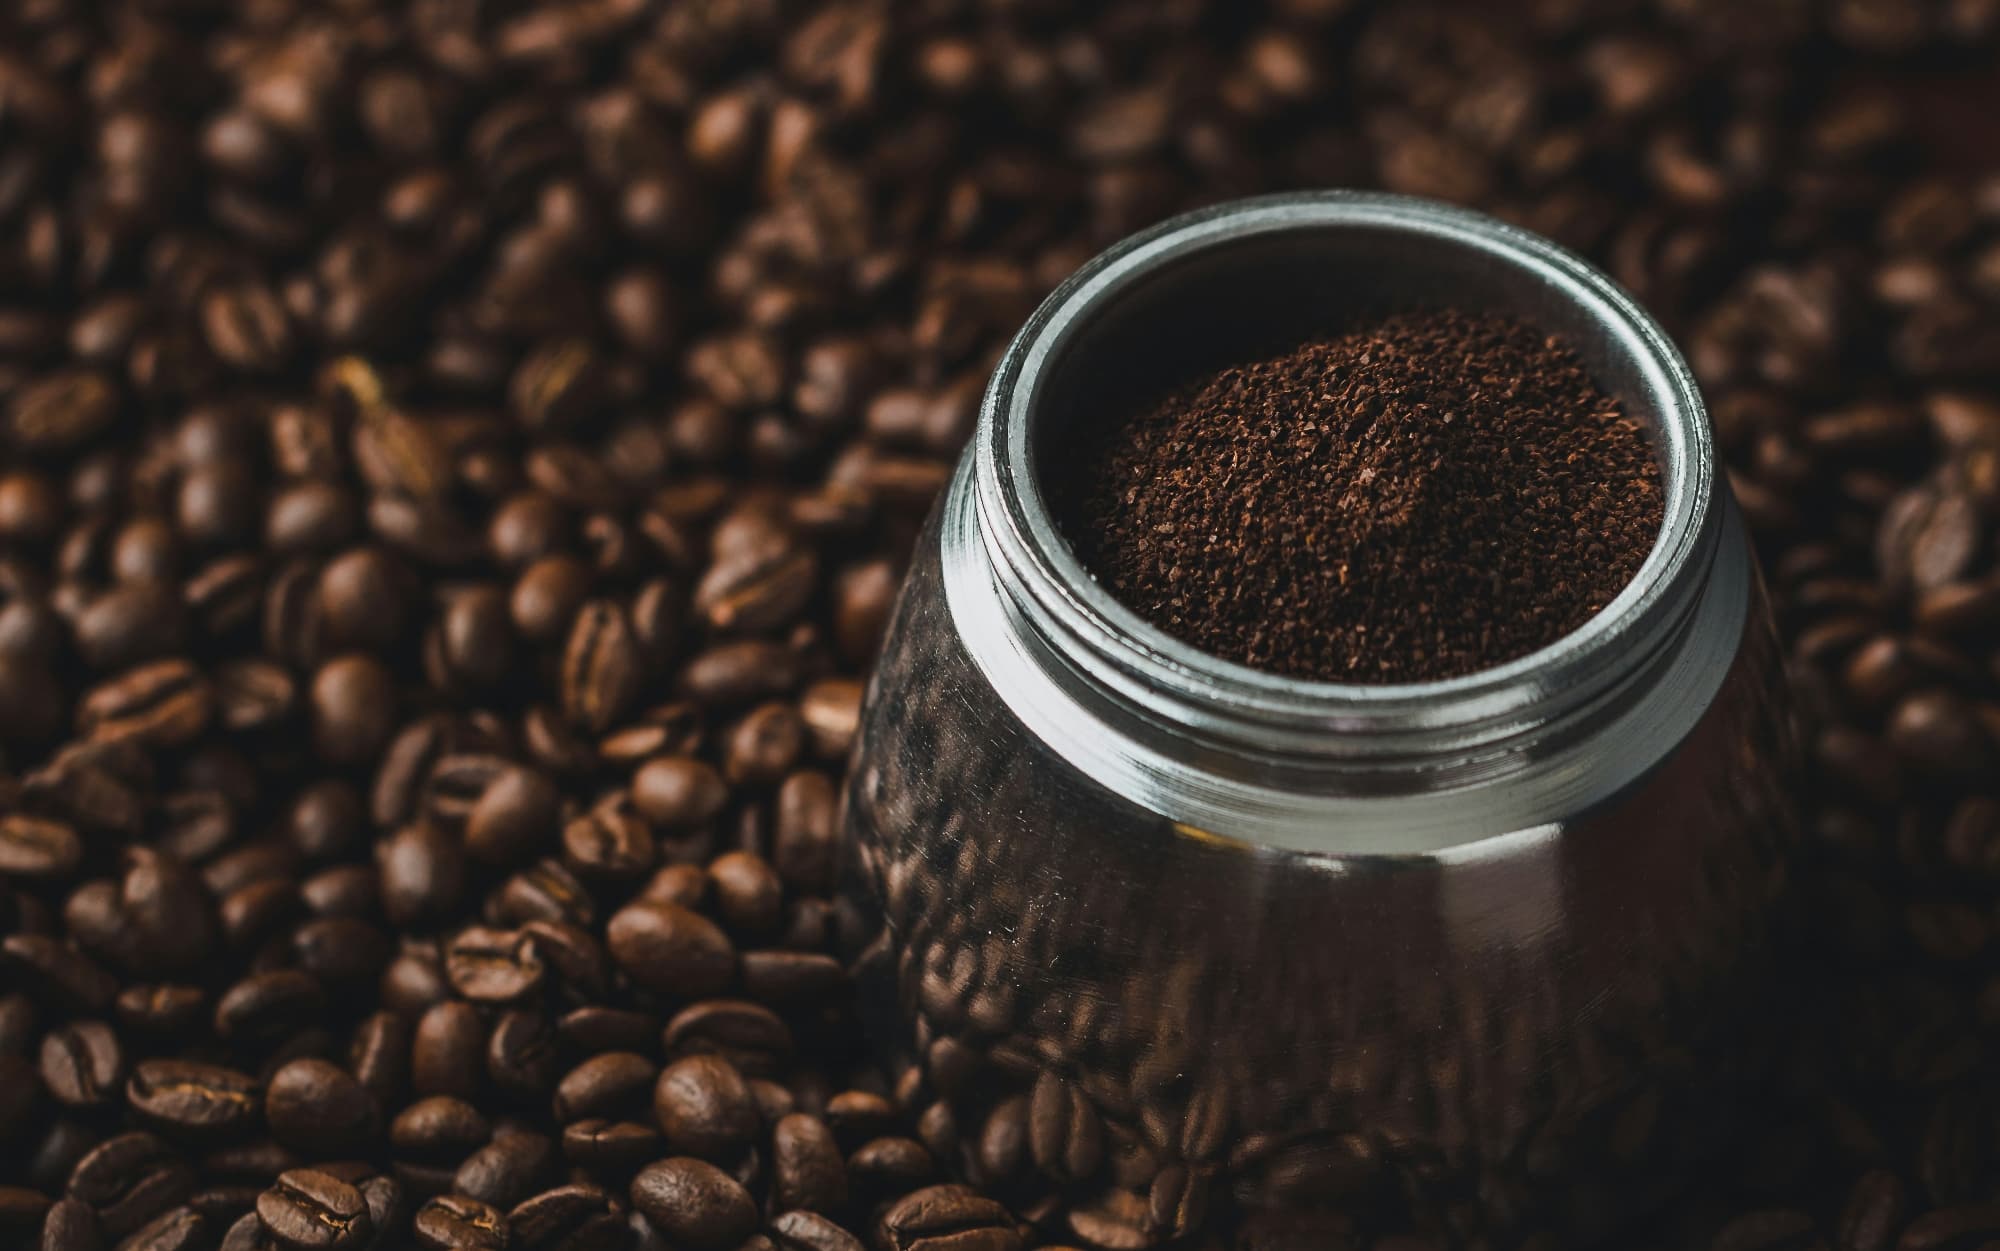 Dark roasted coffee are shown with a canister of ground dark roast coffee.